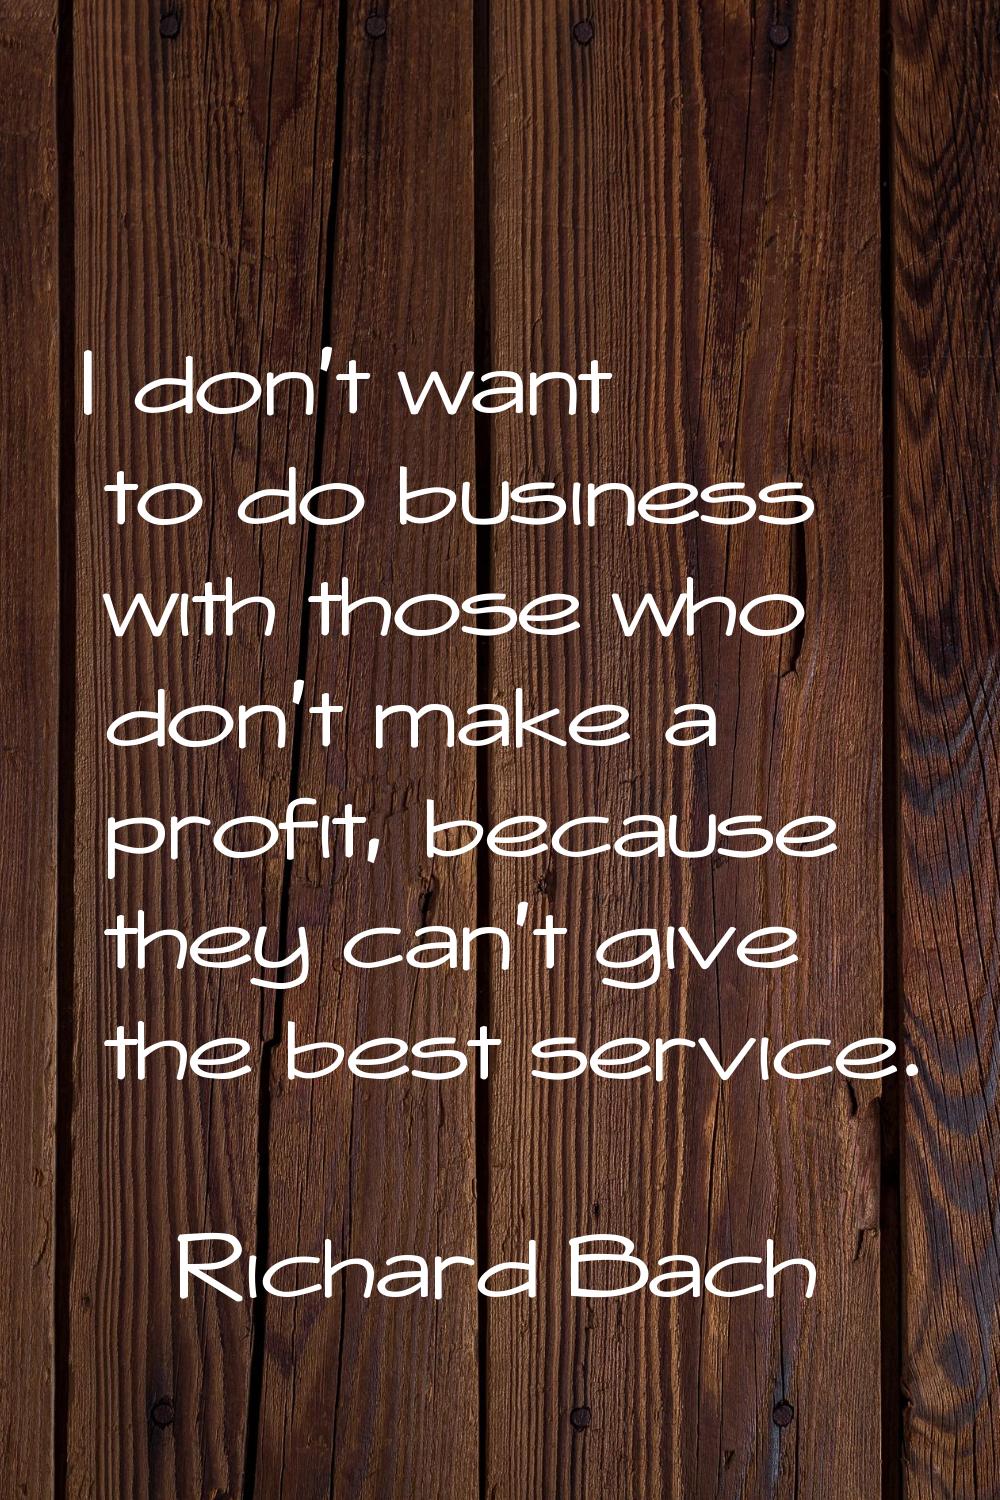 I don't want to do business with those who don't make a profit, because they can't give the best se